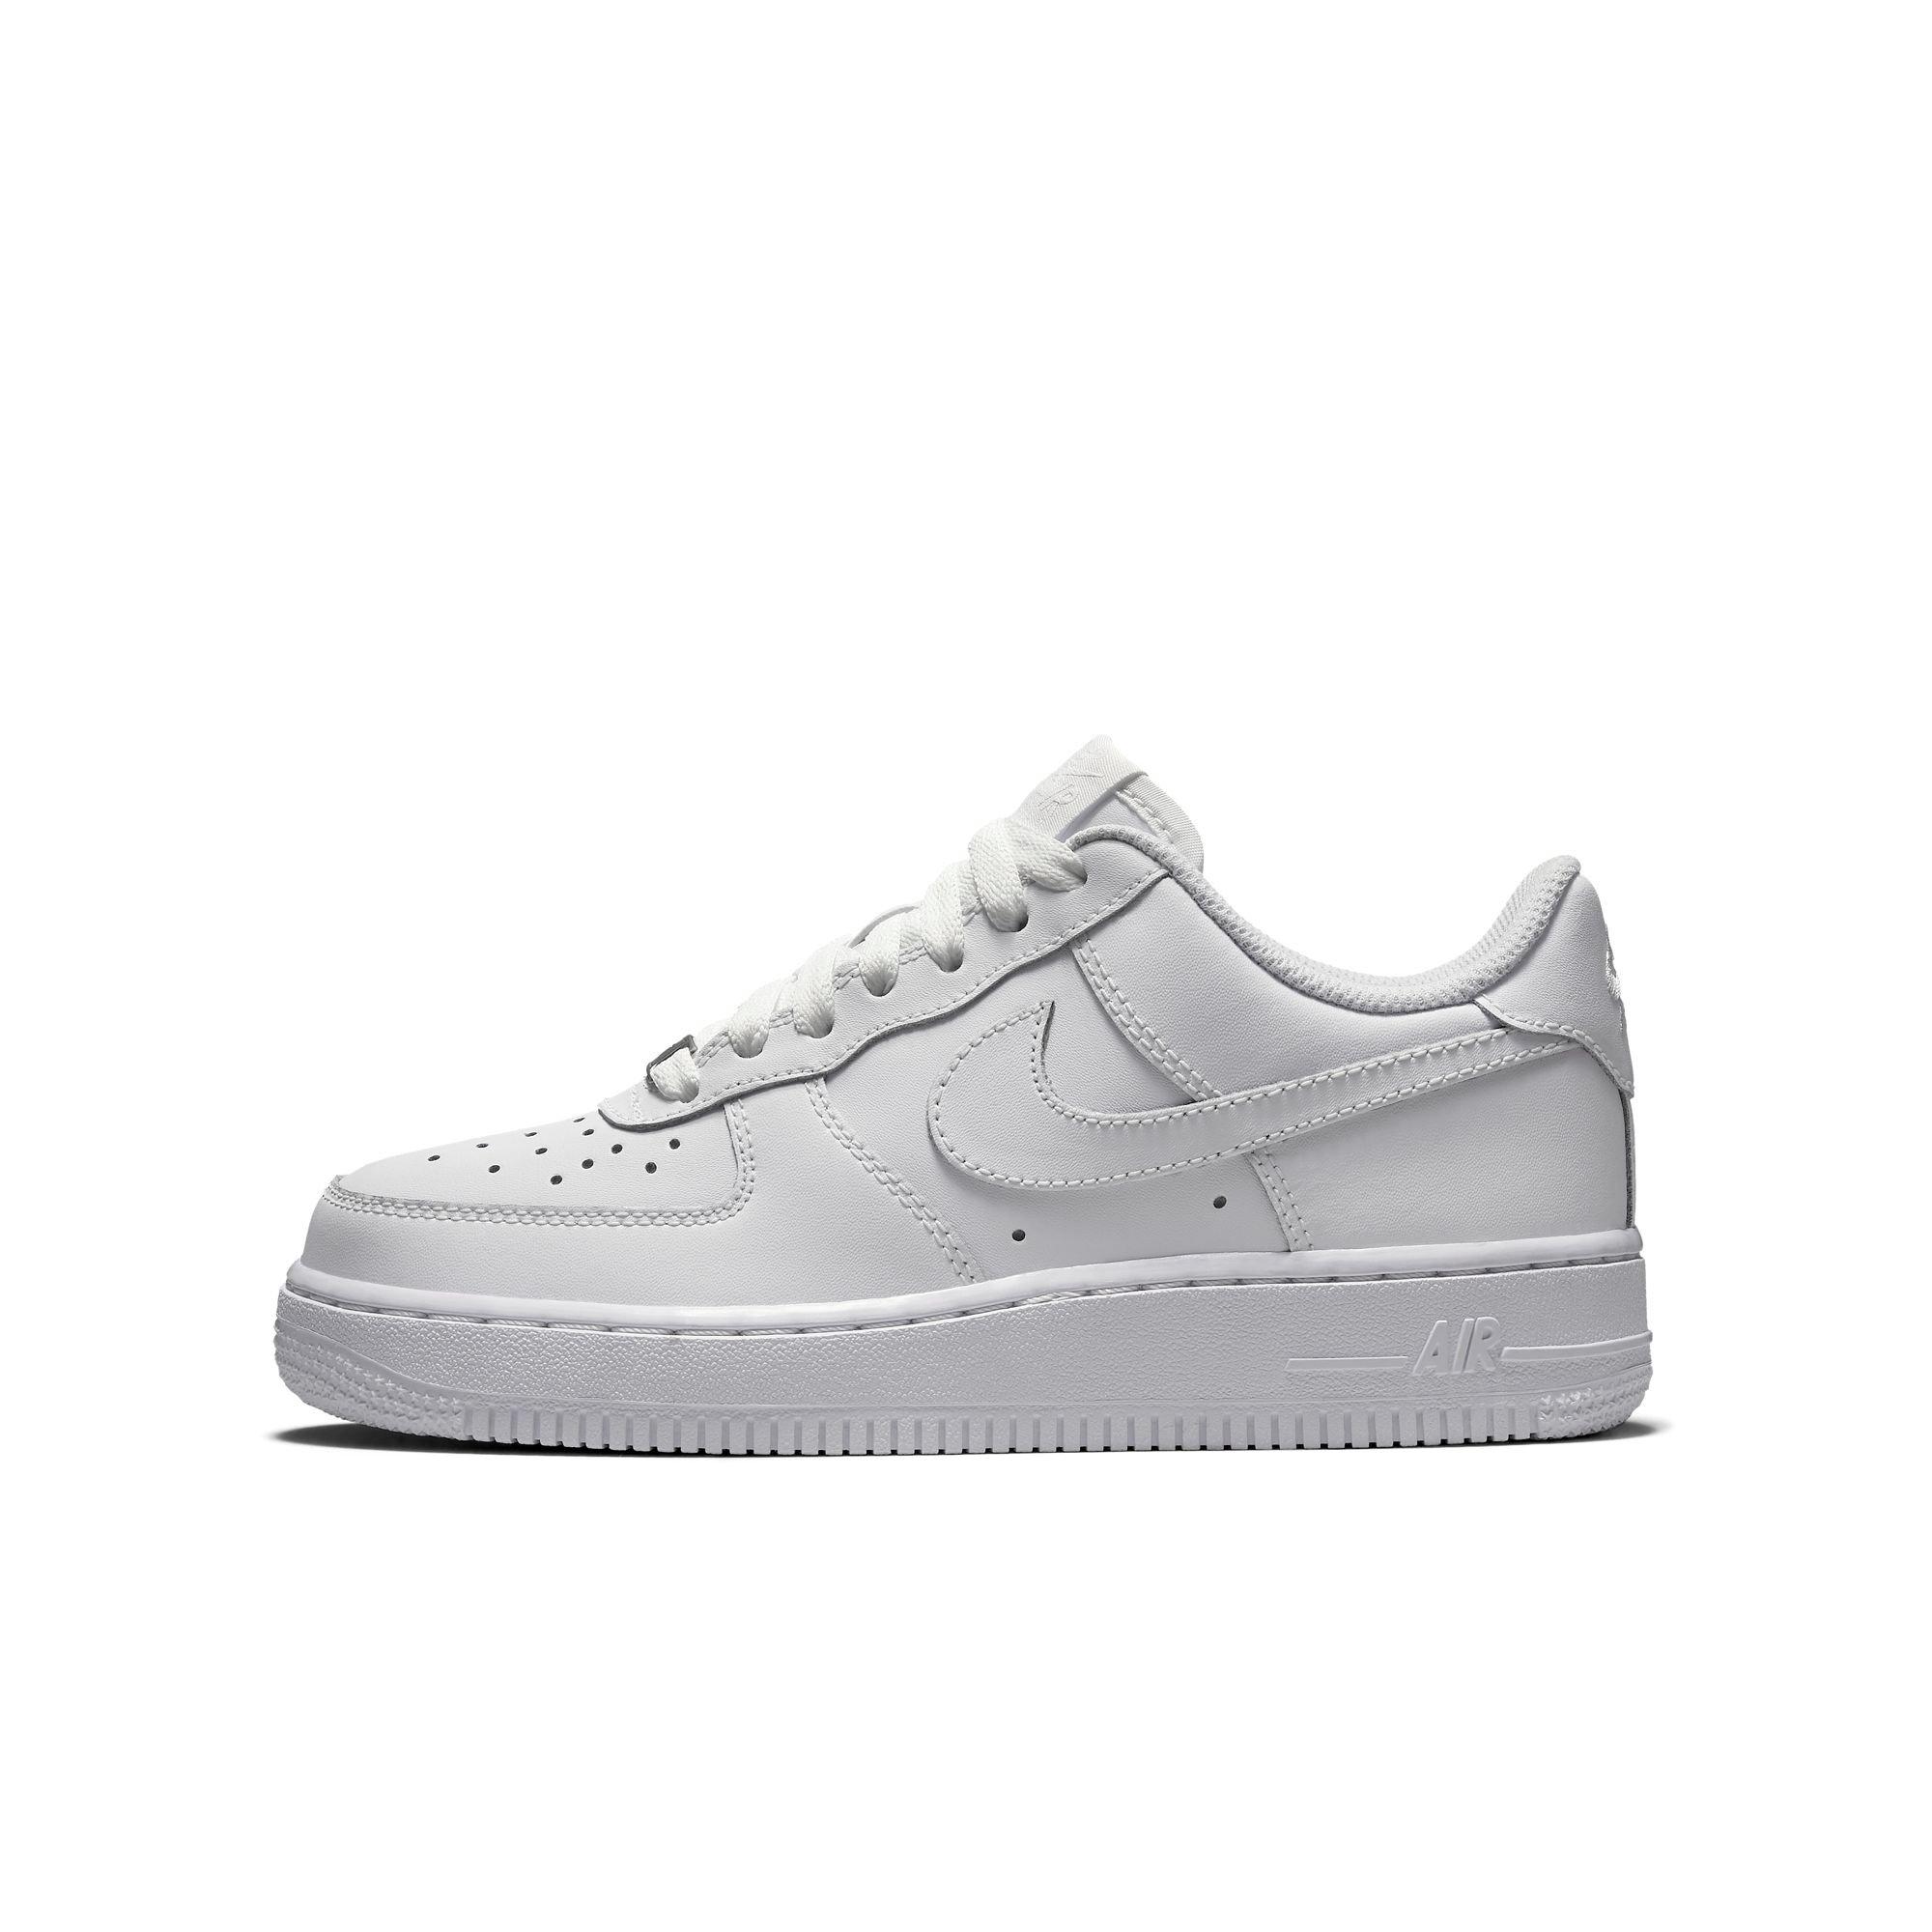 nike air force one size 6.5